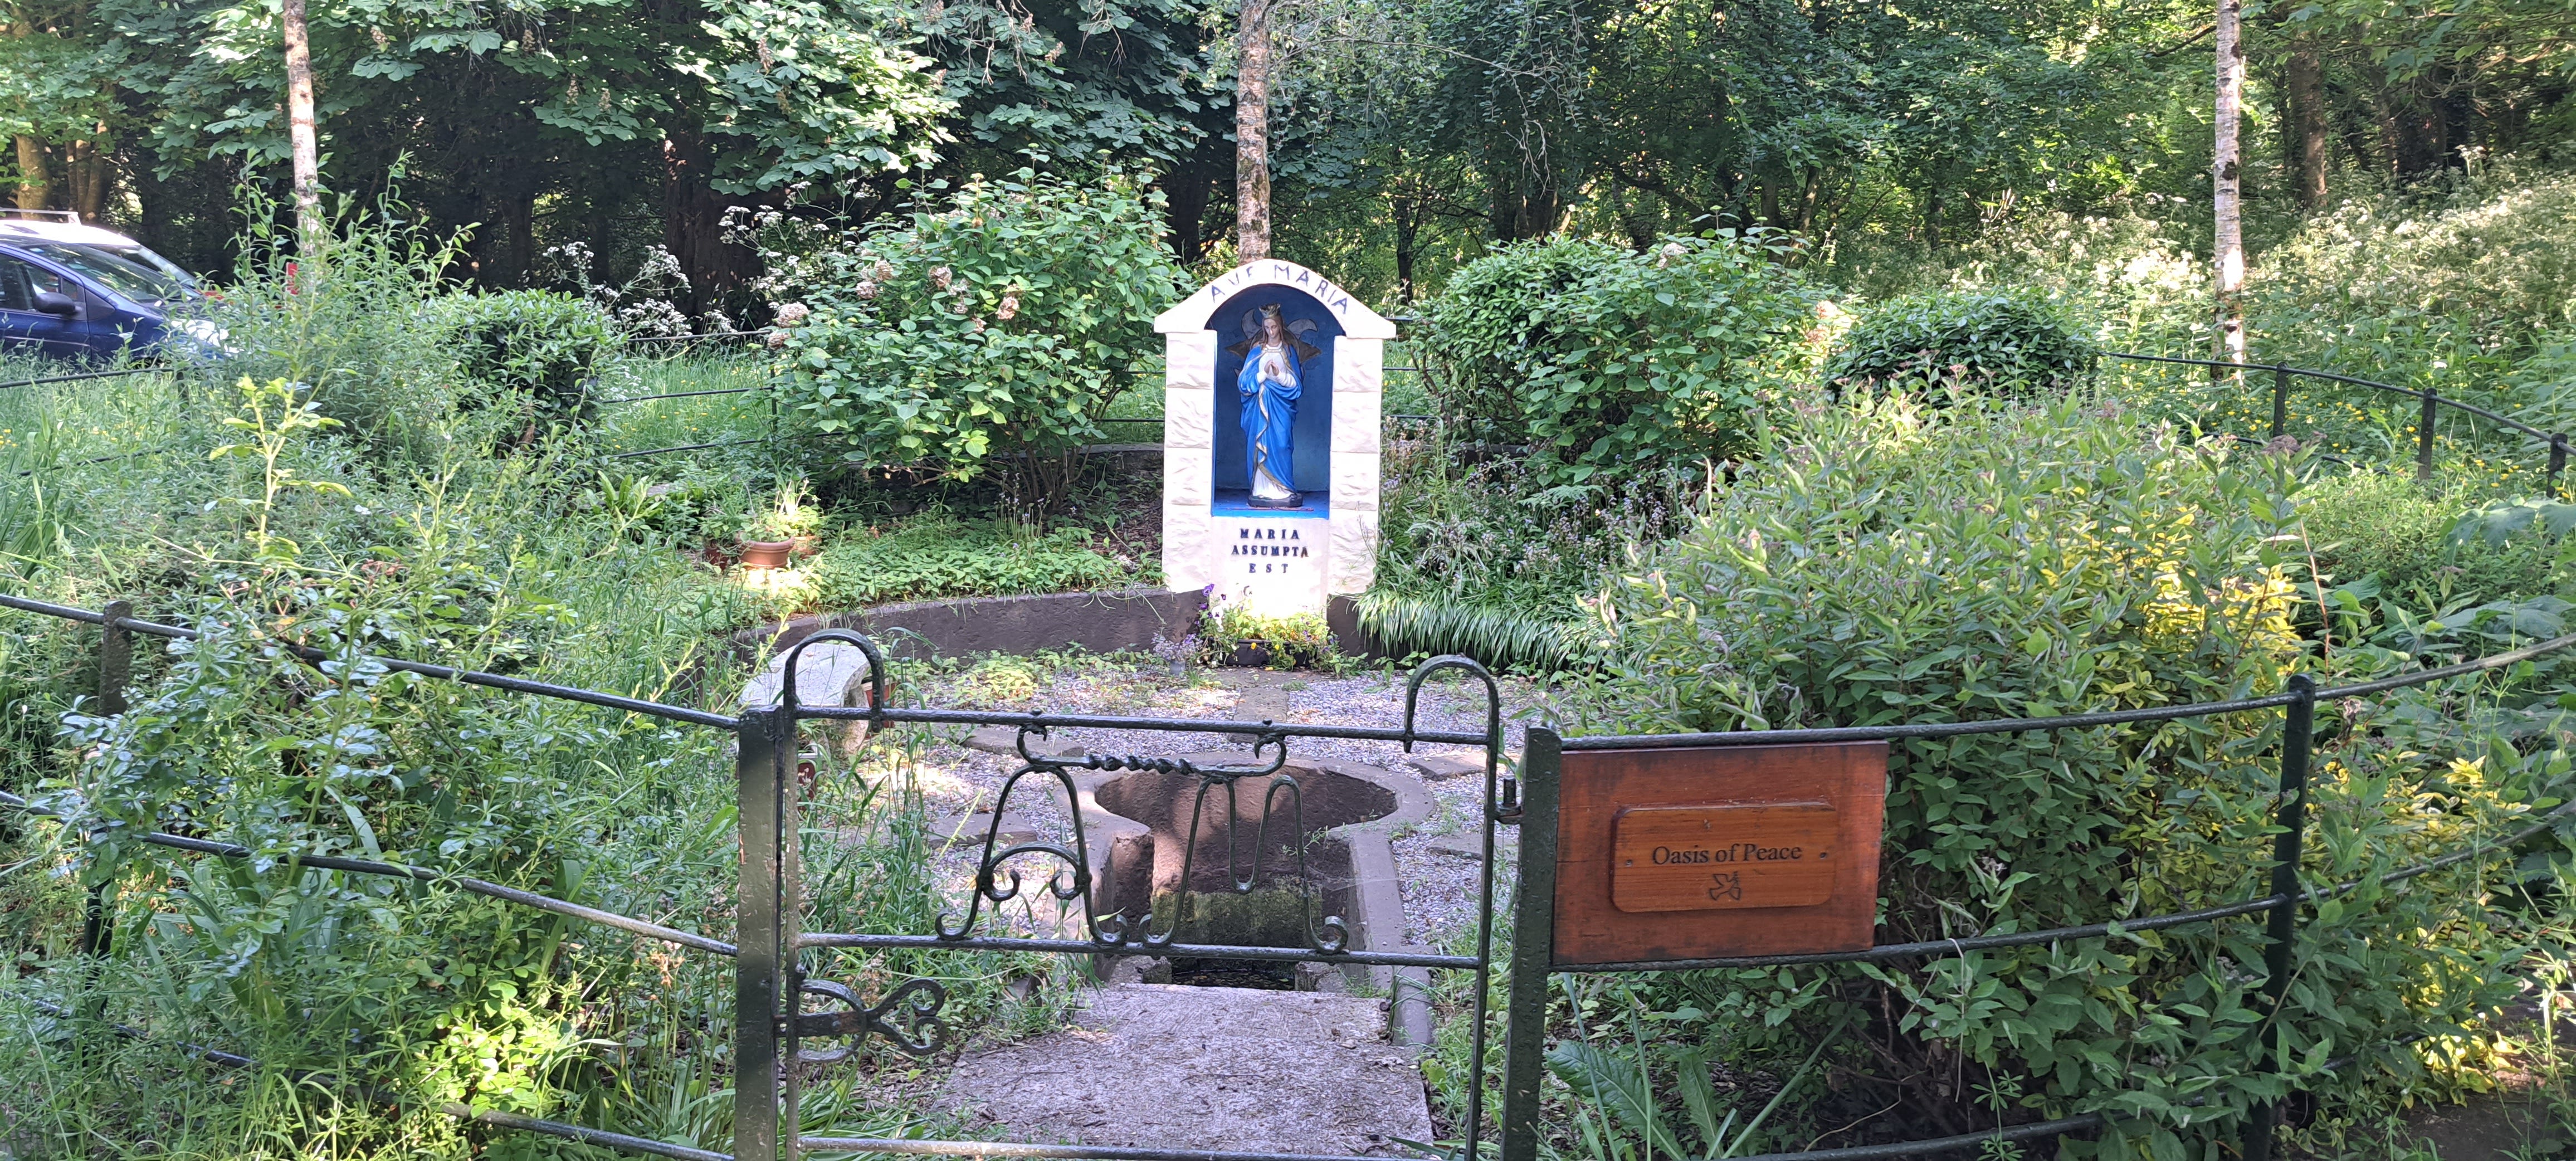 A circular space enclosed within a metal fence, exuberent flower beds in full growth but not yet in bloom, with steps in a gravel bed leading down to the water and beyond, a statue of Mary, to whom the well is dedicated. A wooden sign reads "Oasis of Peace".